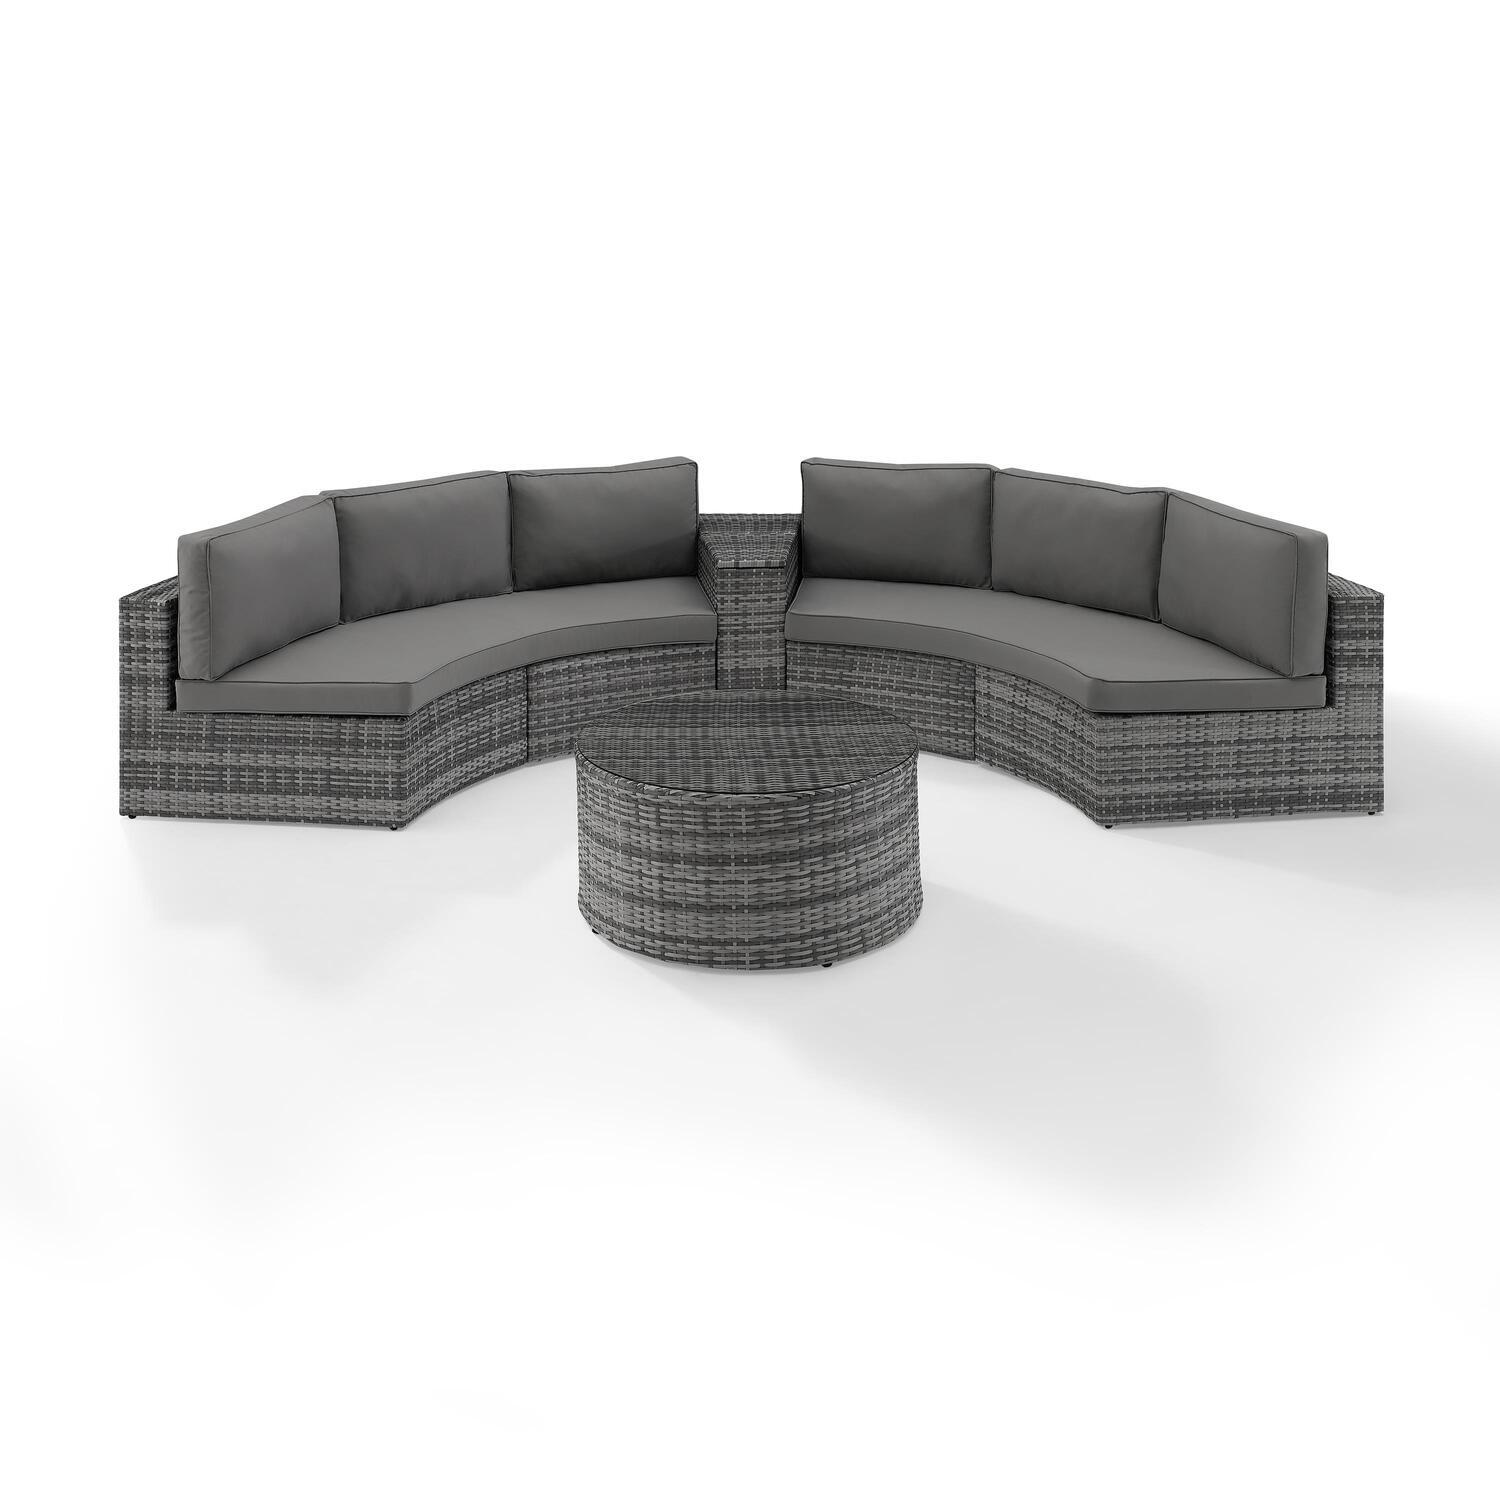 Crosley Catalina 4Pc Outdoor Wicker Sectional Set Gray/Gray - Arm Table, Round Glass Top Coffee Table, & 2 Round Sectional Sofas - image 1 of 9